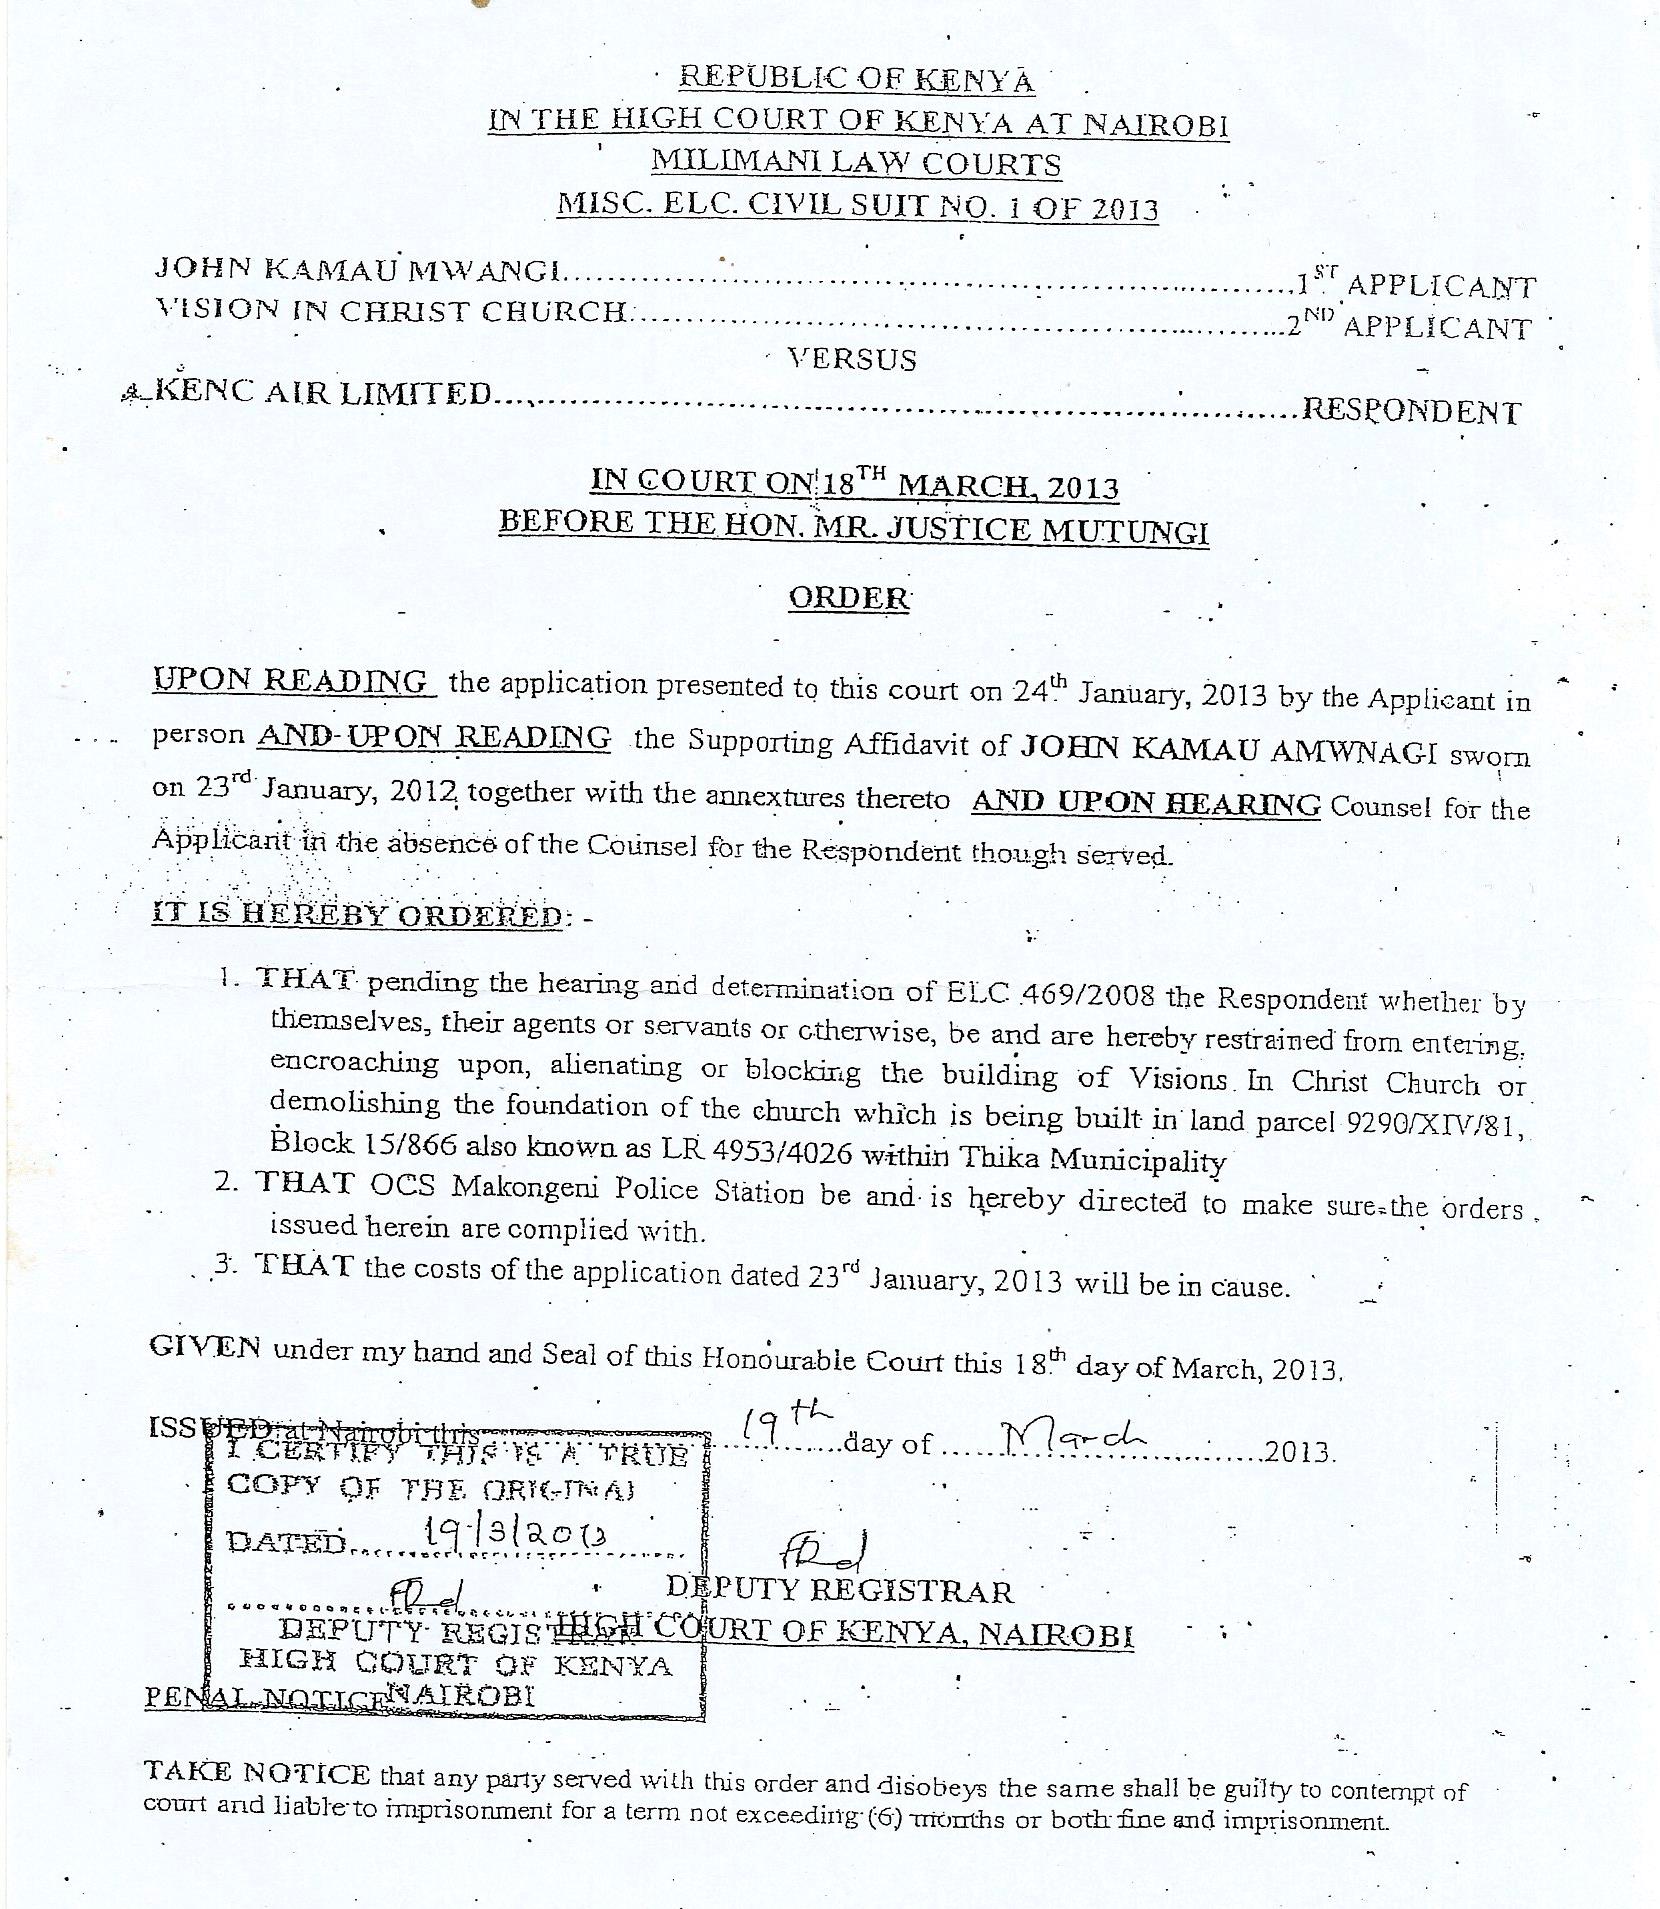 One of the orders issued by the High Court on the land